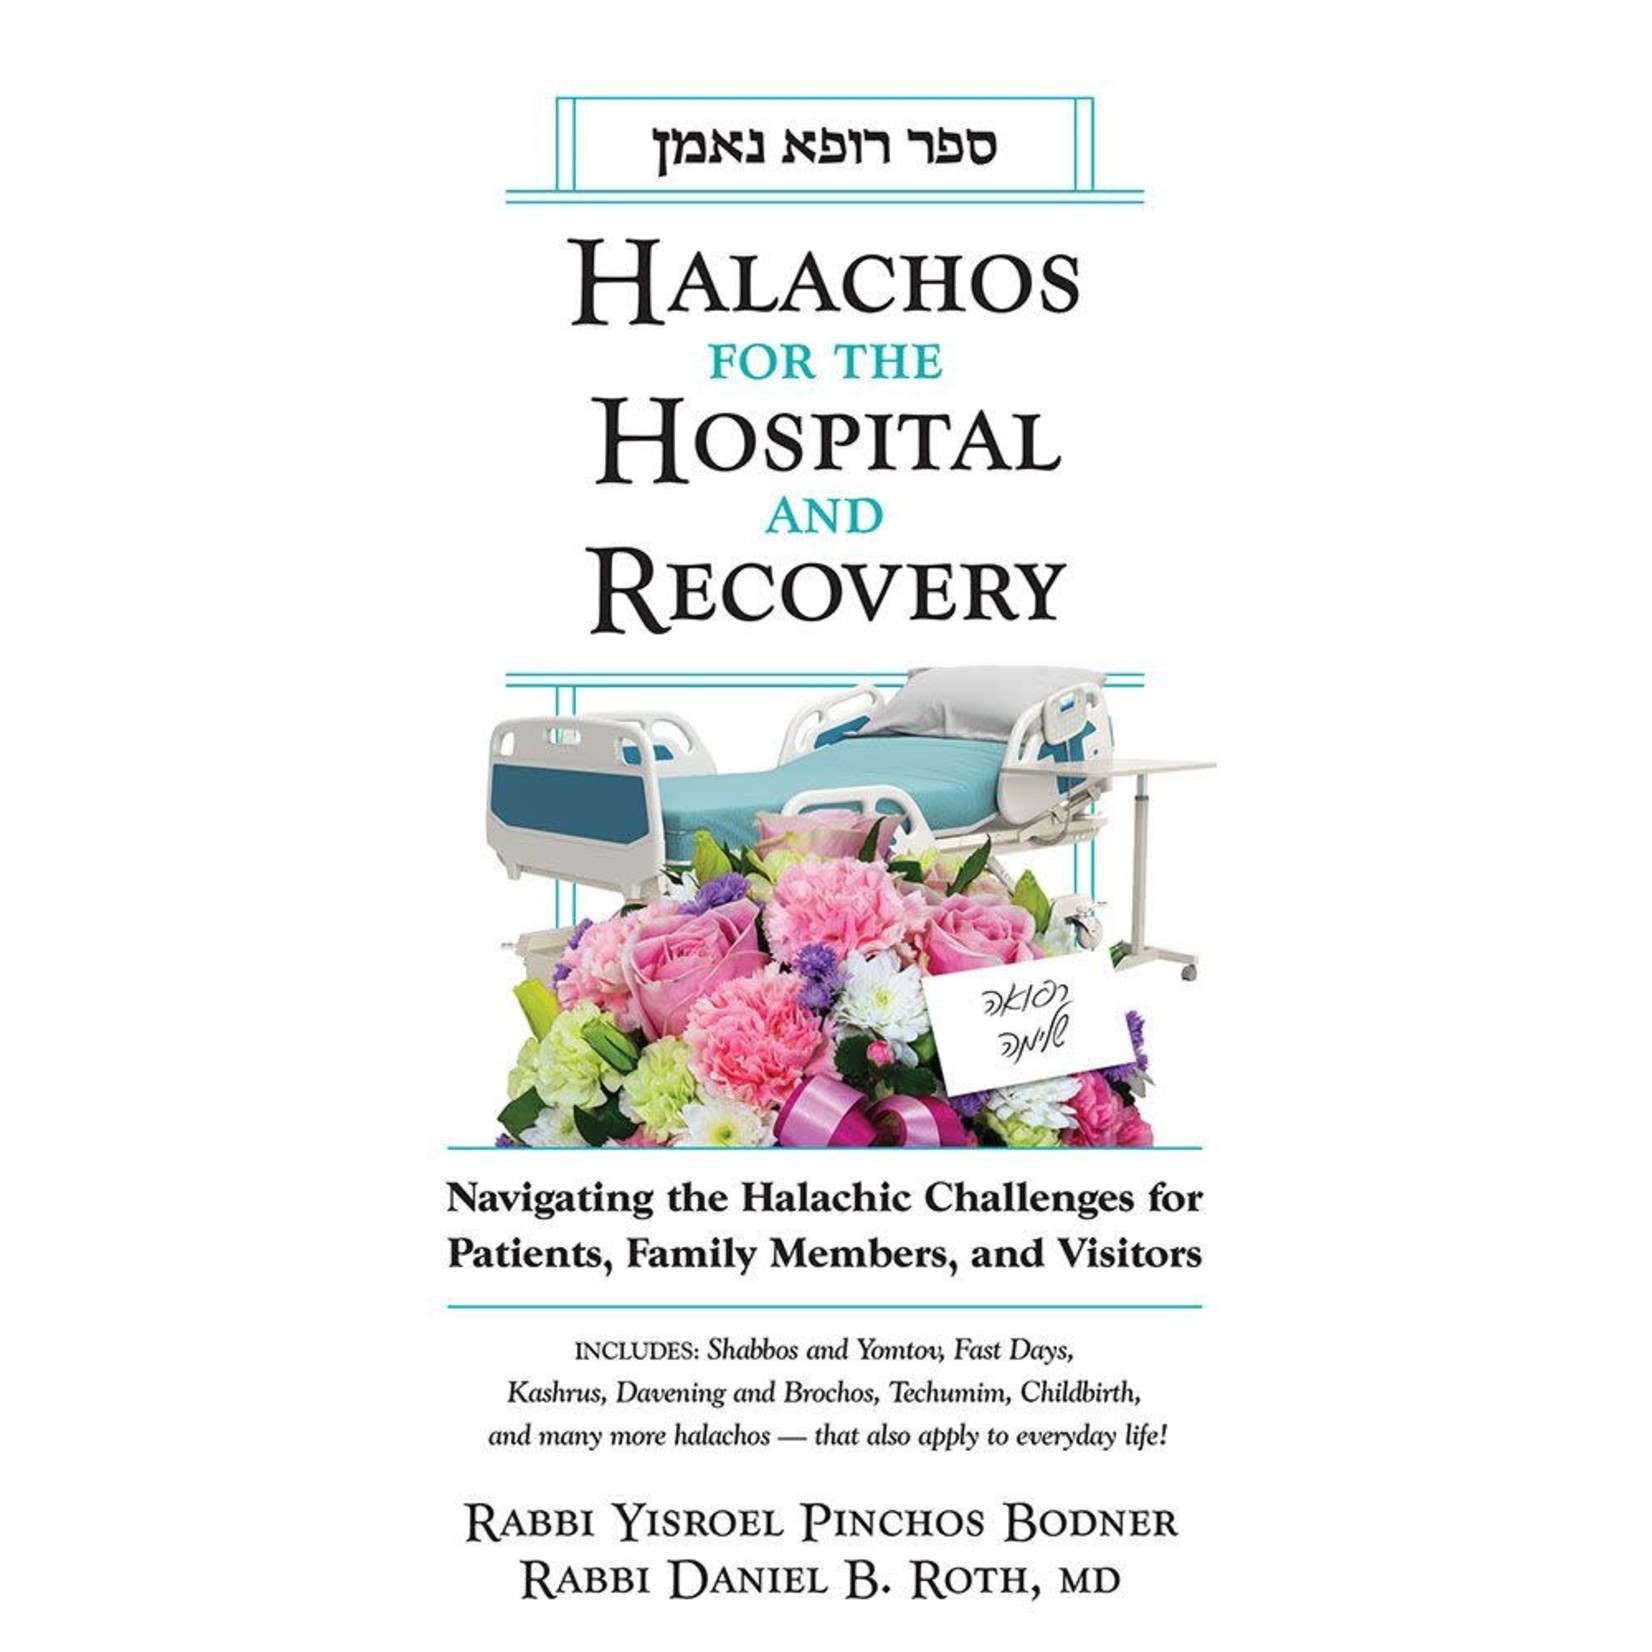 Halachos for Hospital and Recovery